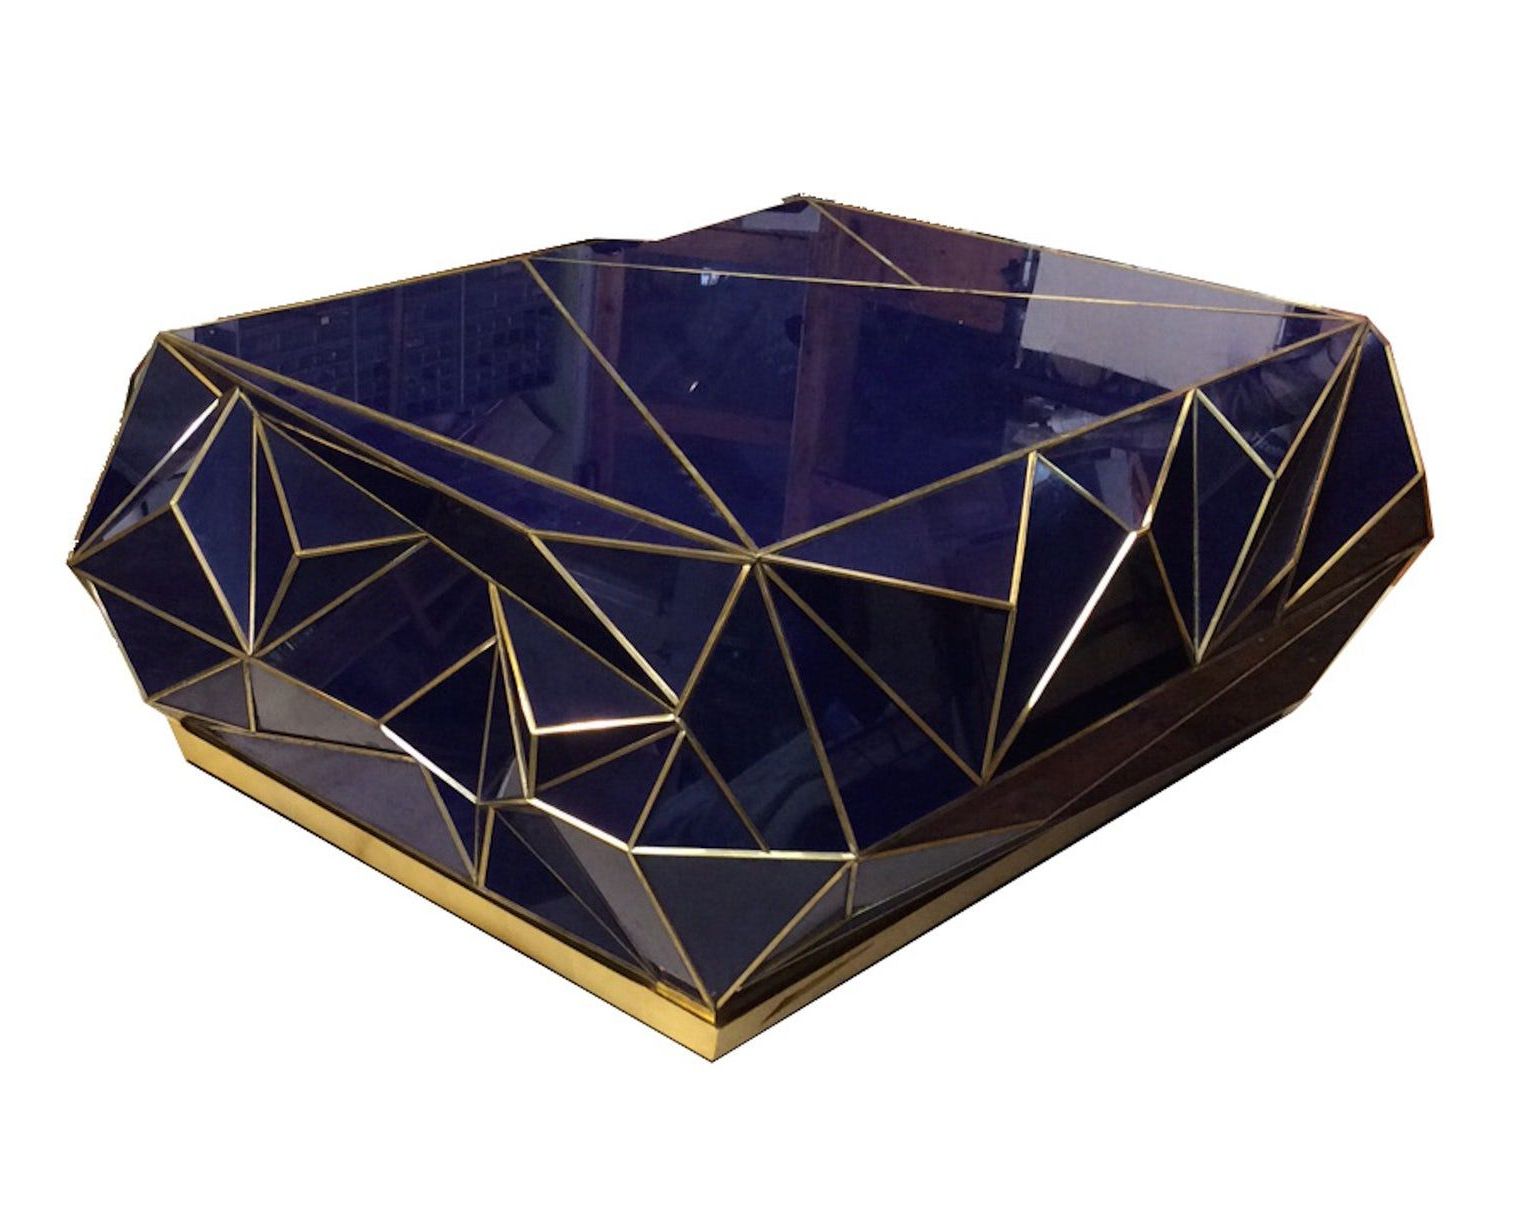 Cobalt Coffee Tables Pertaining To Famous Diamond Cobalt Glass Coffee Table – Contemporary Coffee (View 8 of 20)